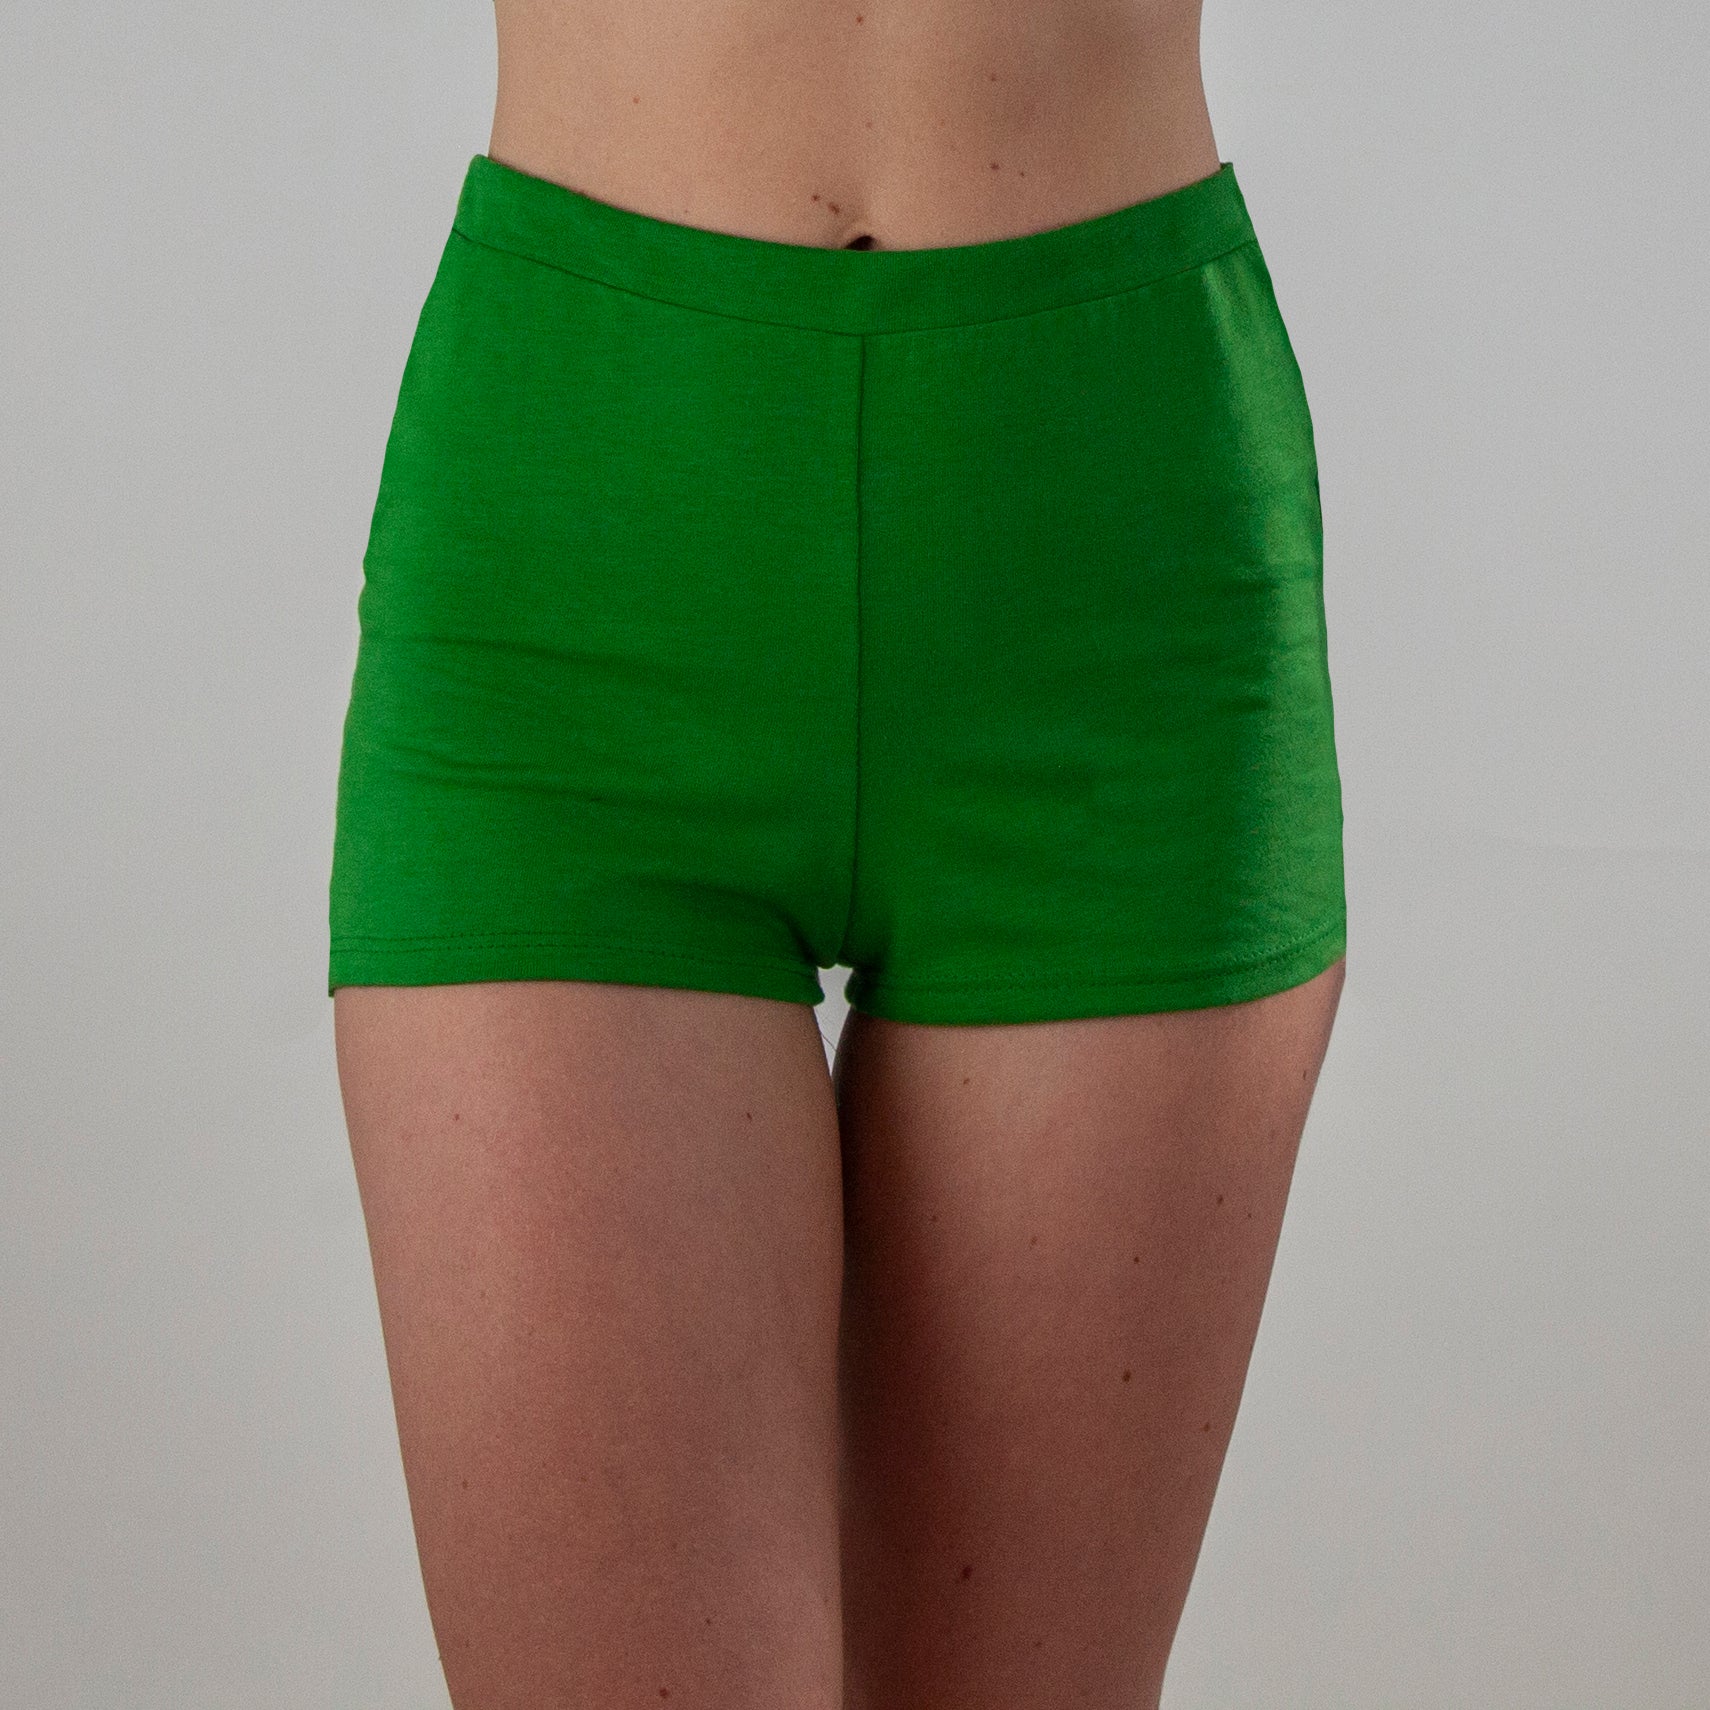 SOLD OUT! - Little Shorts - Green